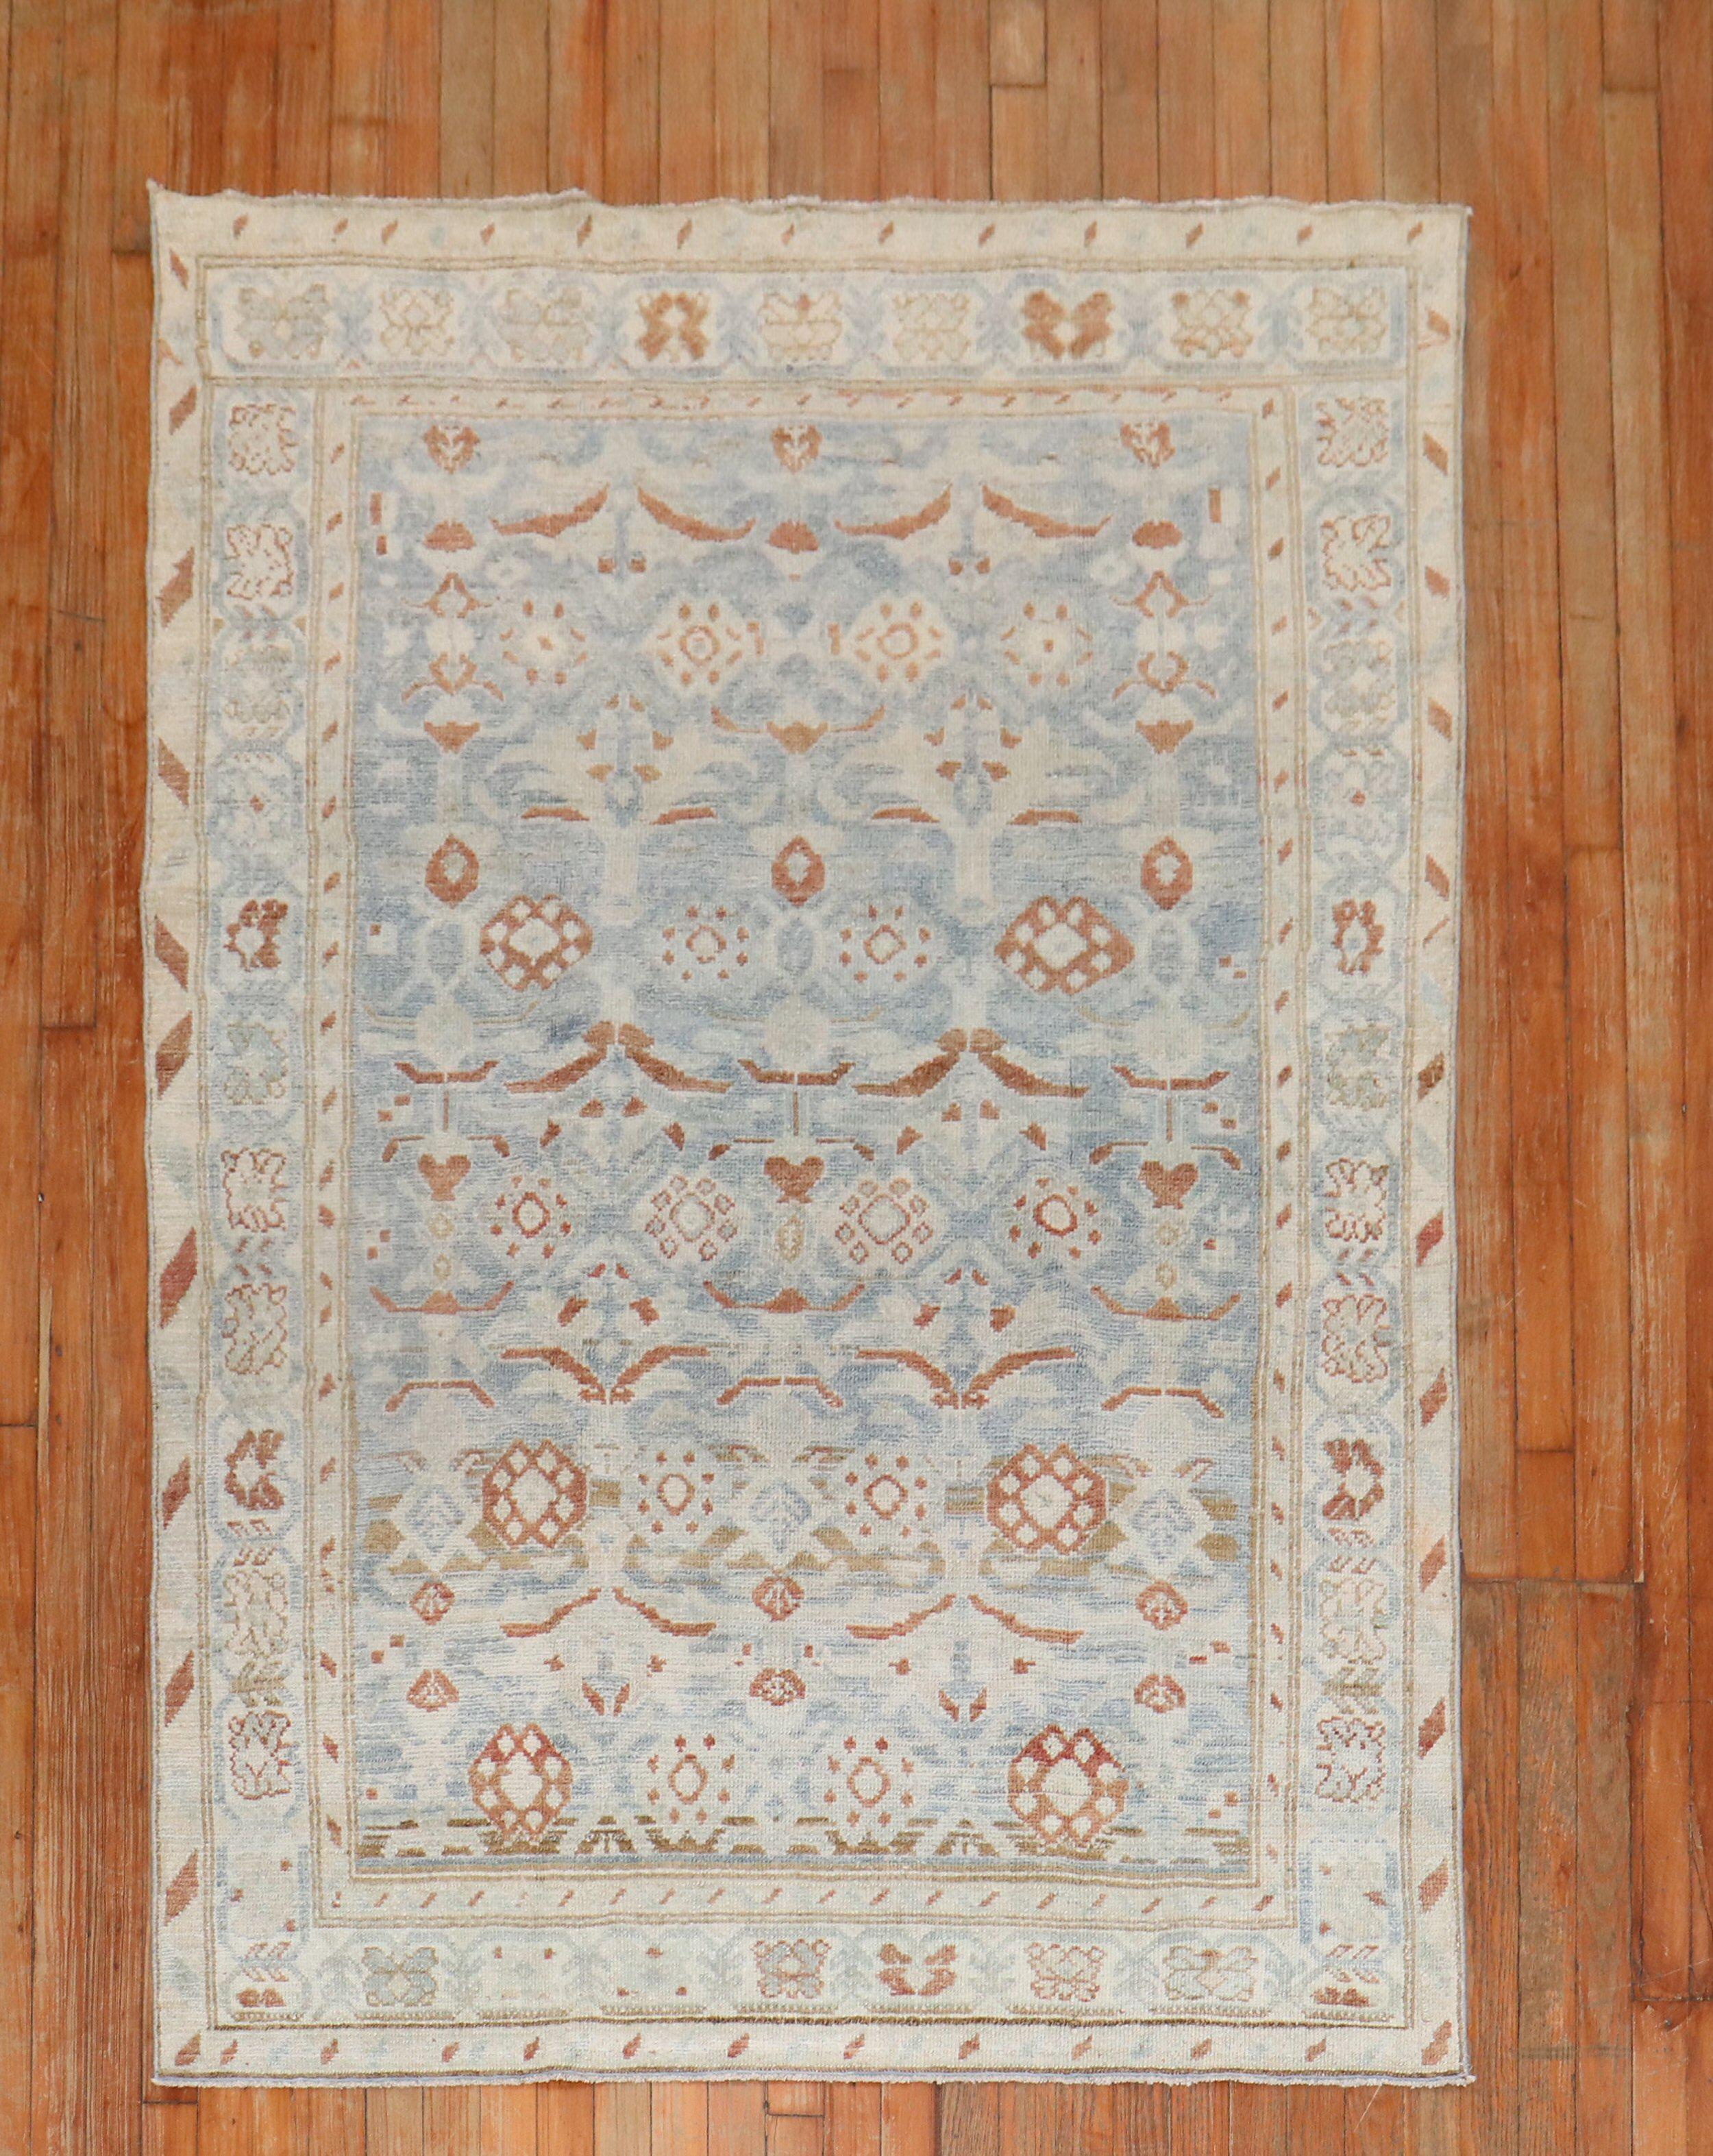 Antique Decorative Persian rug from the malayer village located in northwest Persian in blues and rust

Measure: 4'6'' x 6'6''.